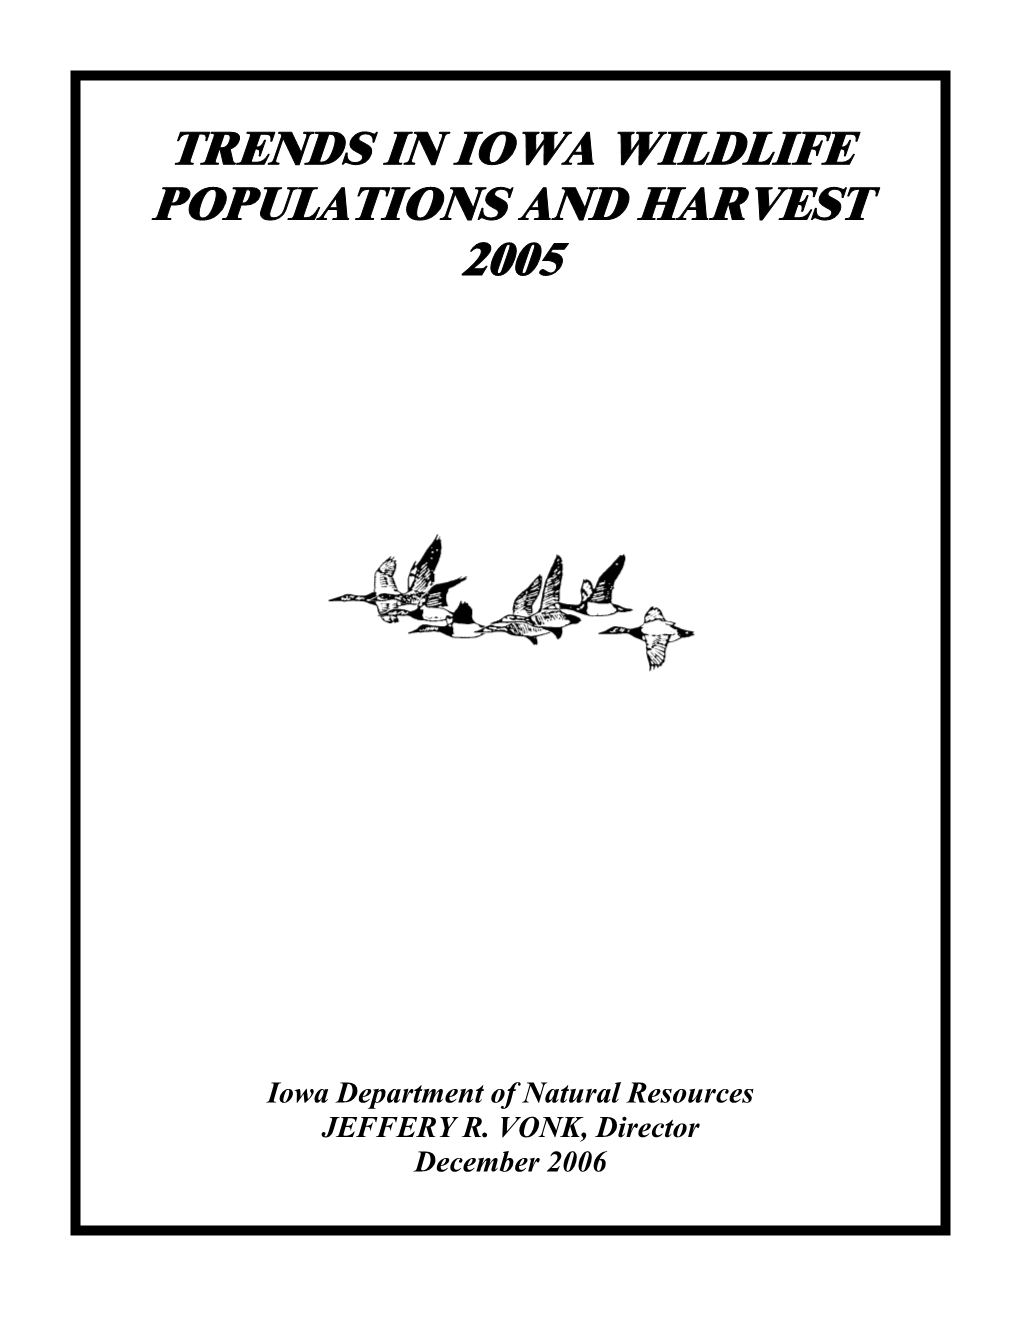 Trends in Iowa Wildlife Populations and Harvest 2005